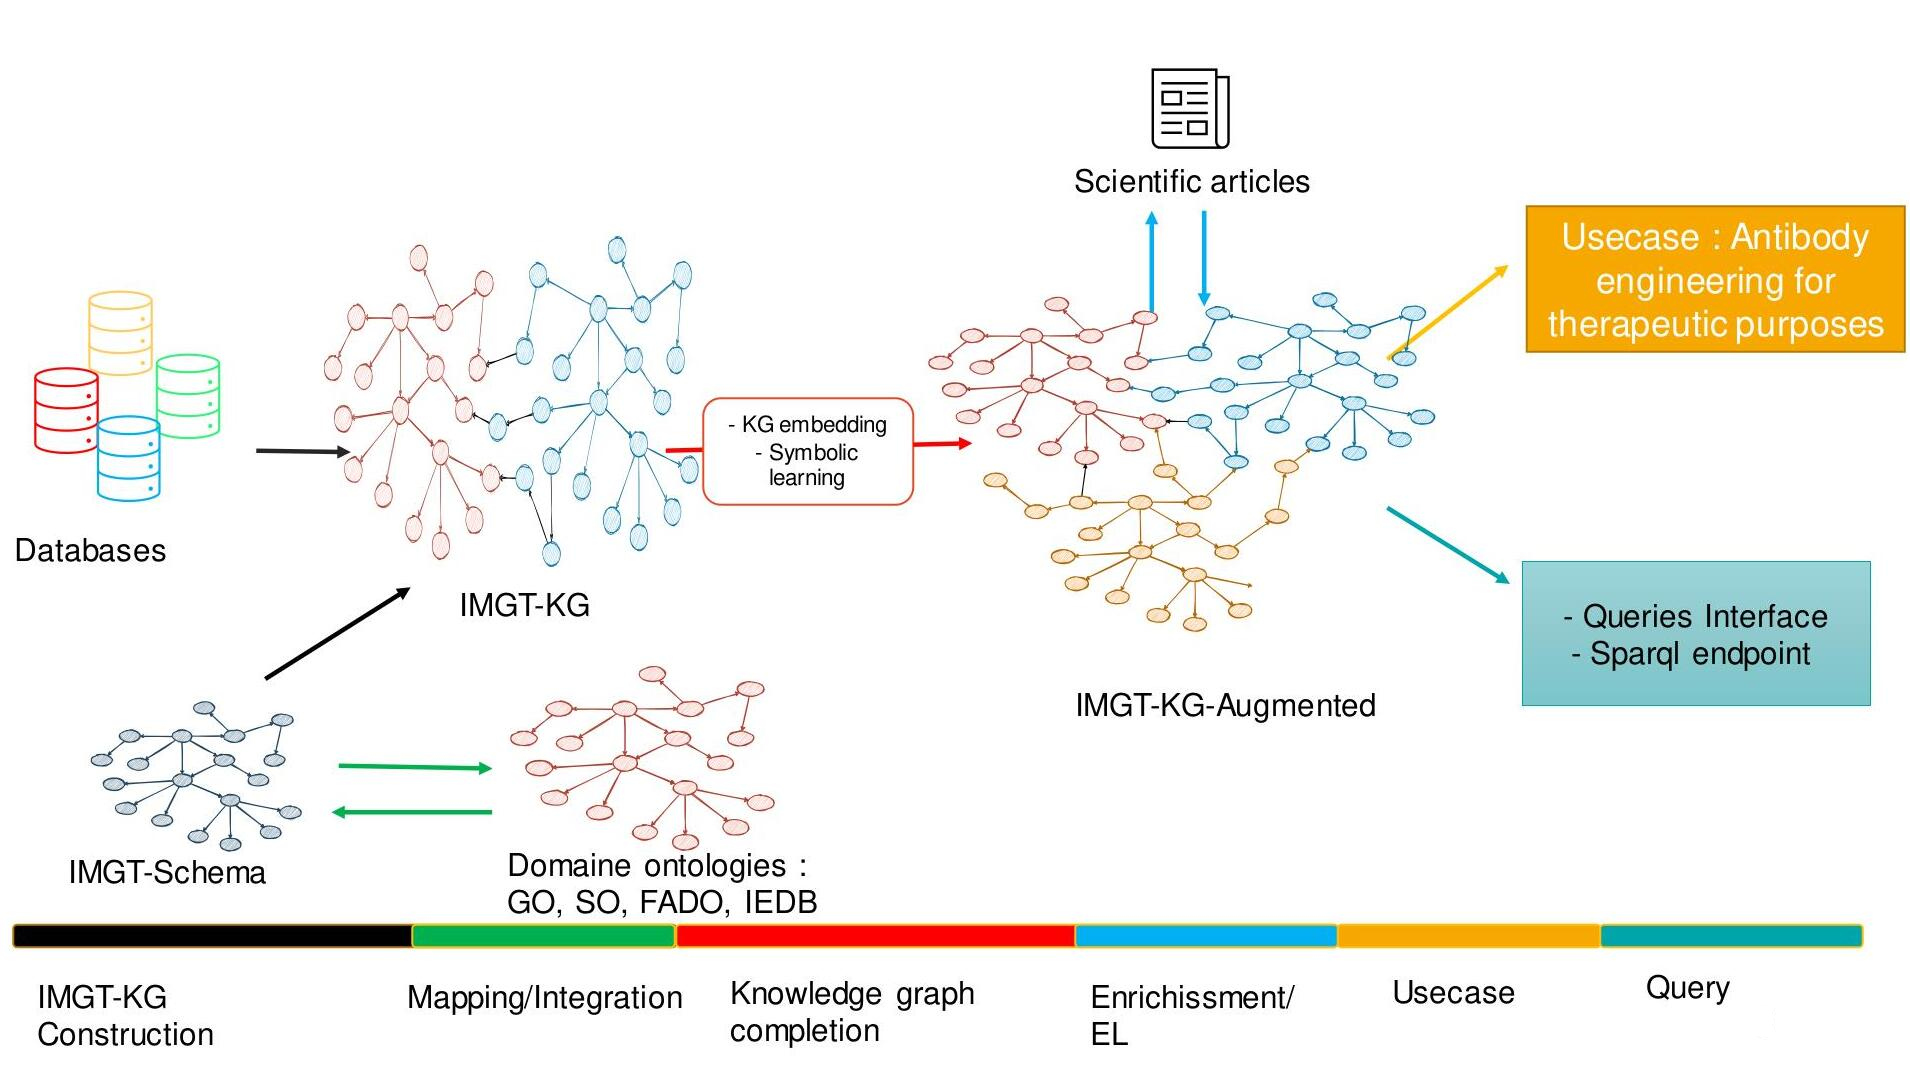 A knowledge base in immunogenetics for discovering new knowledge images